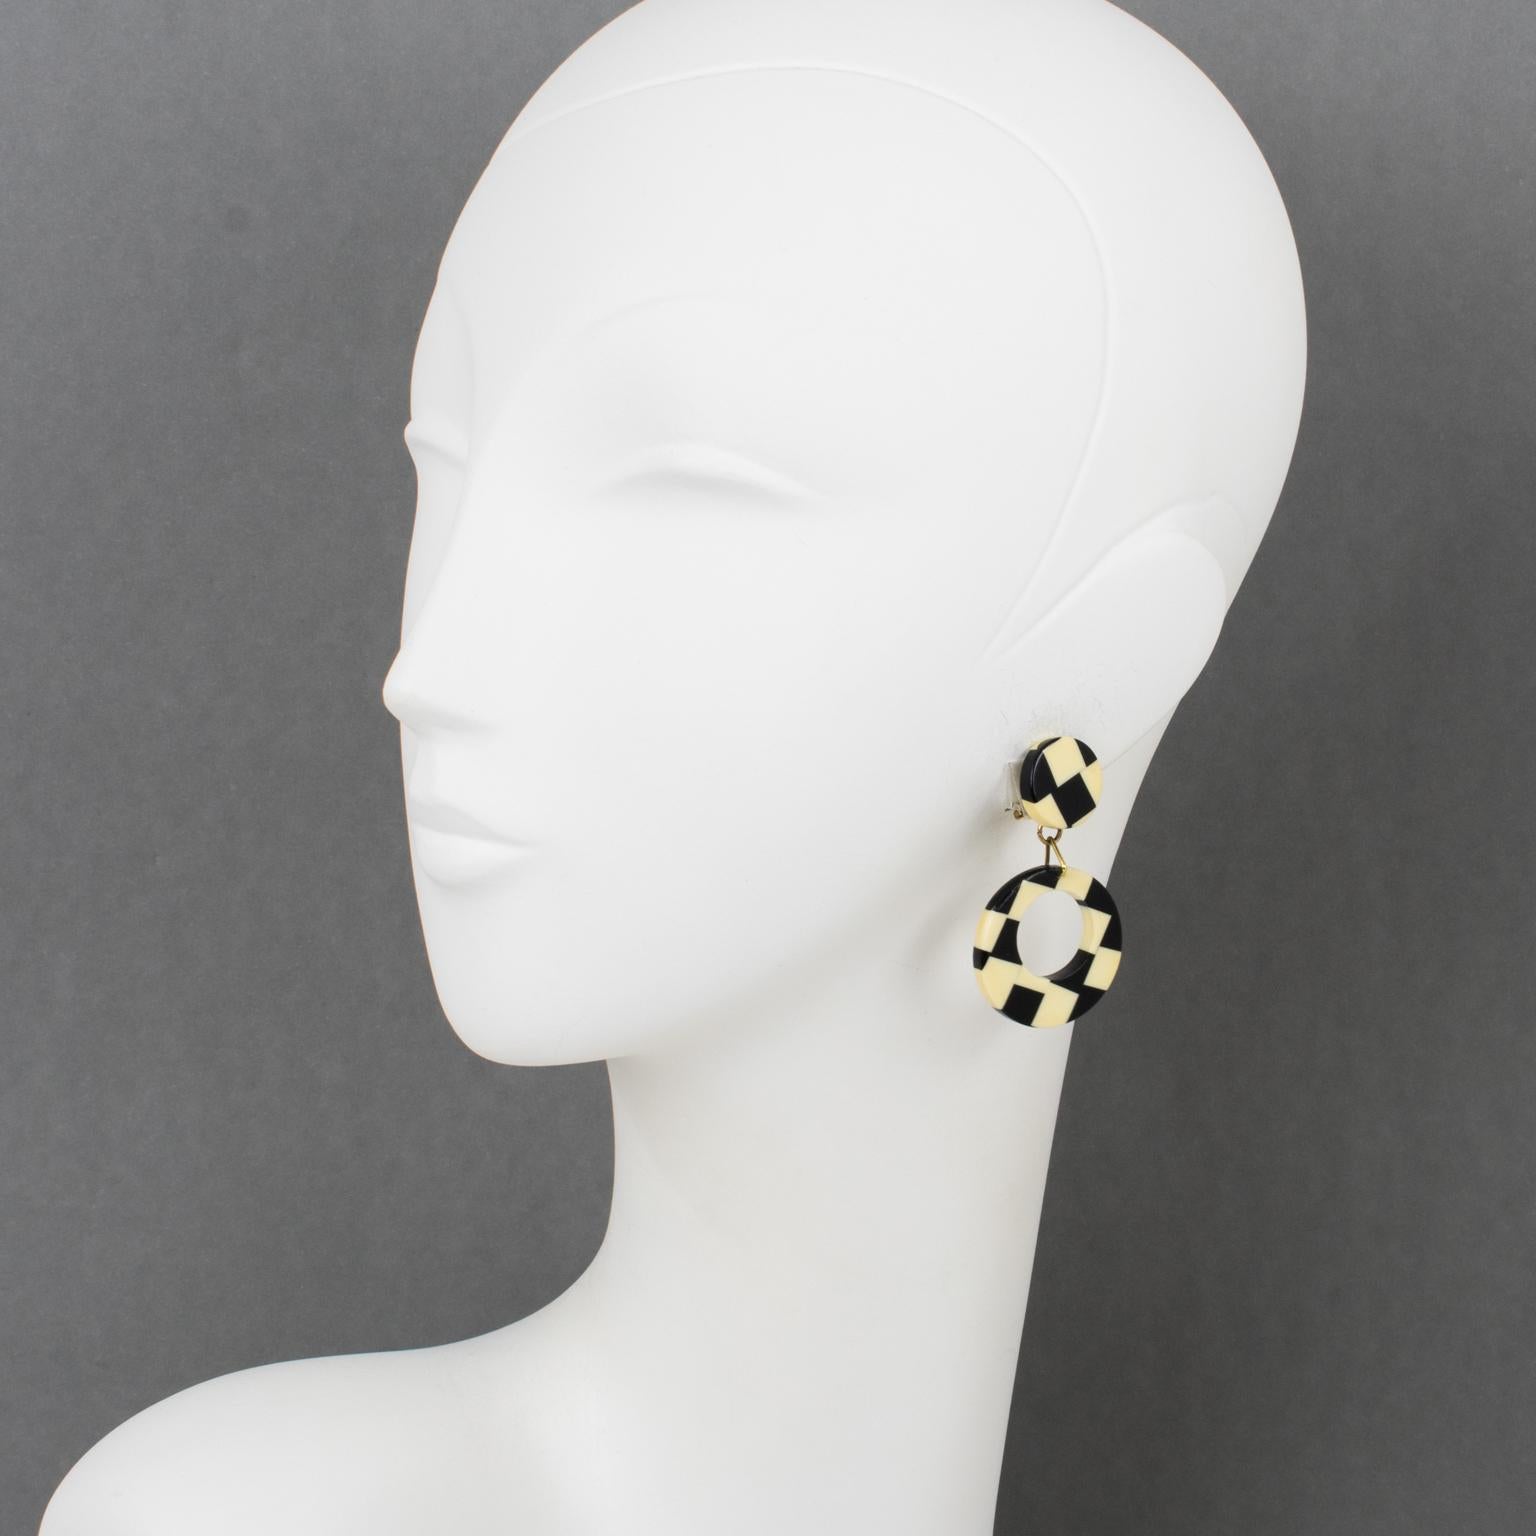 These stunning 1960s Pop Art clip-on earrings feature a dimensional dangling geometric donut design made of Galalith with a gorgeous checkerboard laminated pattern in black and off-white colors. These earrings have the specific French clip back used